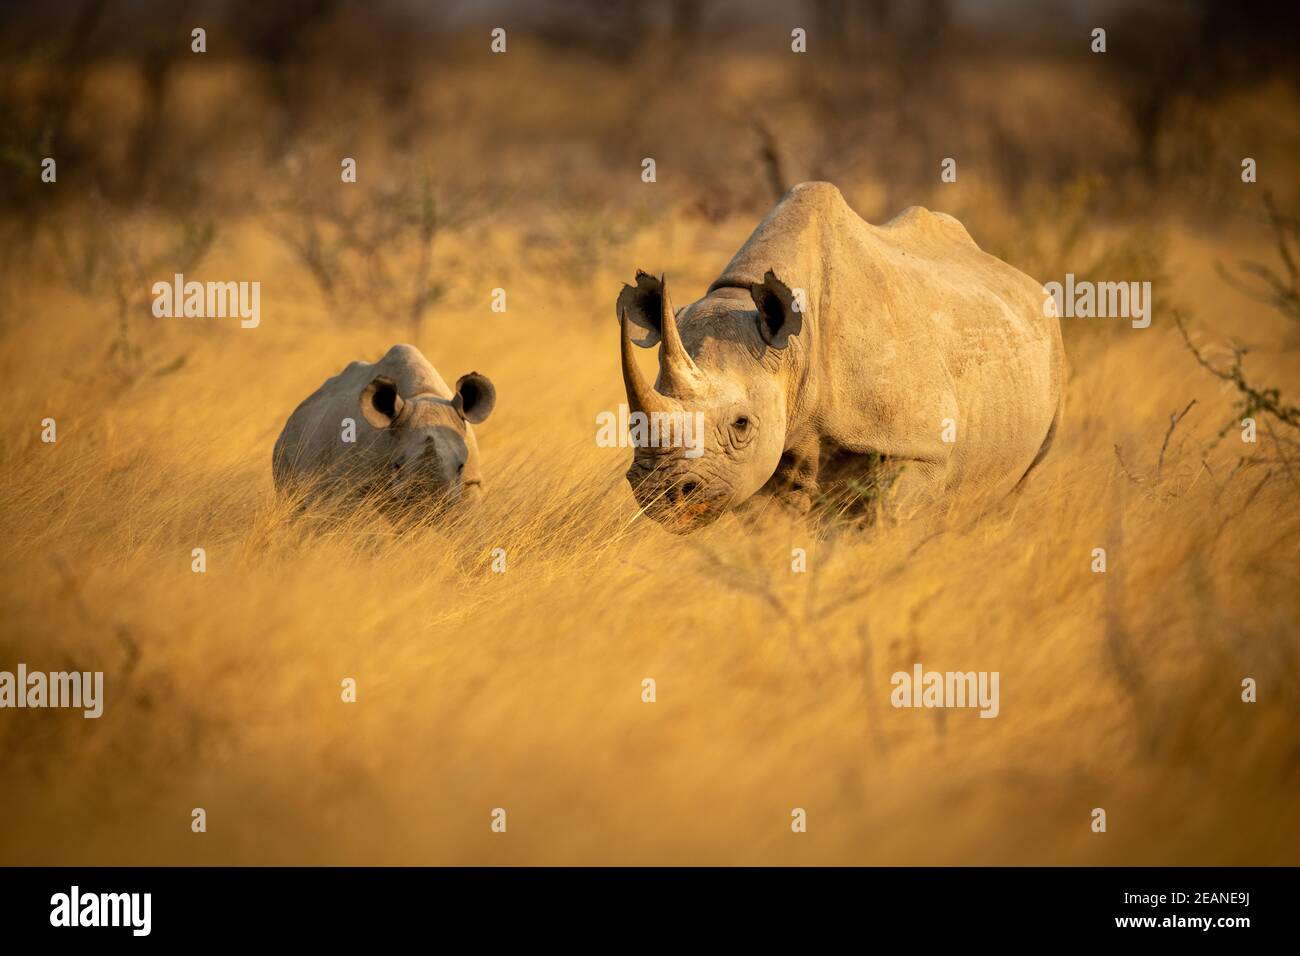 Black rhino stands with baby in grass Stock Photo